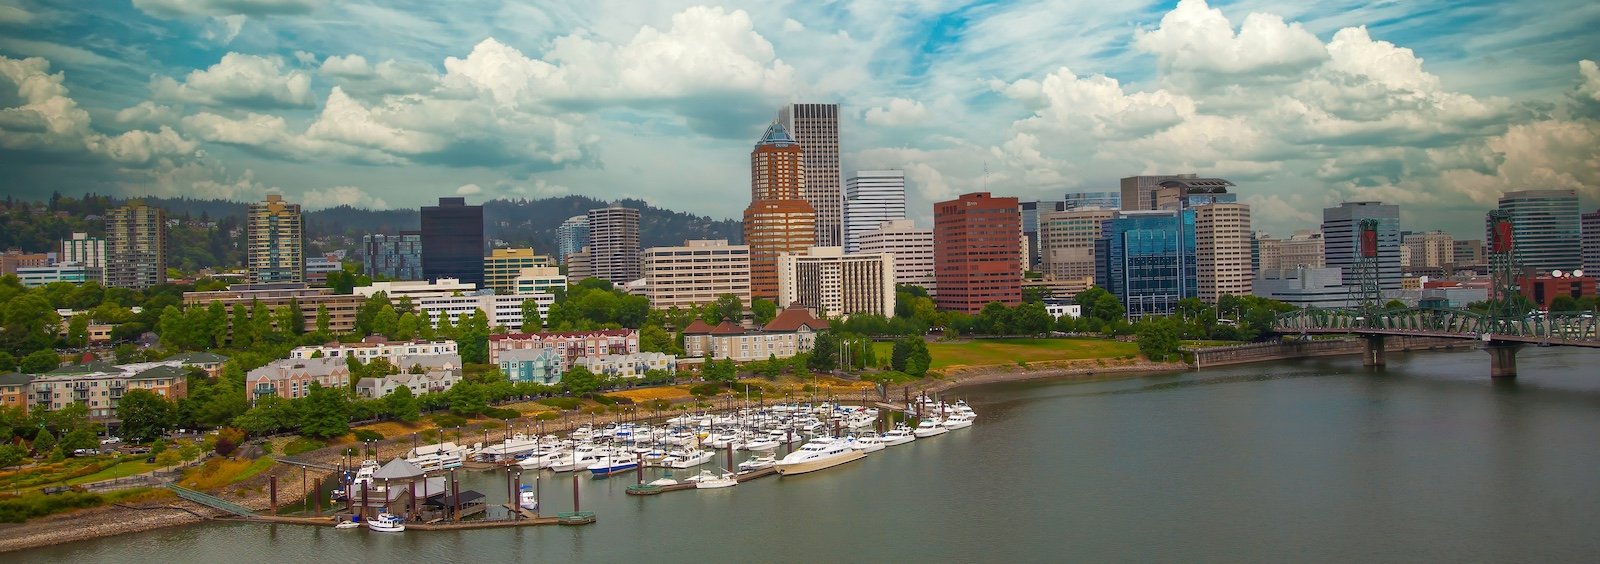 <p>Annual Salary Needed: $289,786</p> <p>Known for its vibrant cultural scene and outdoor activities, Portland’s living costs have risen with its popularity, especially in housing. The city’s progressive atmosphere is supported by a range of local industries, which helps sustain its high cost of living.</p>